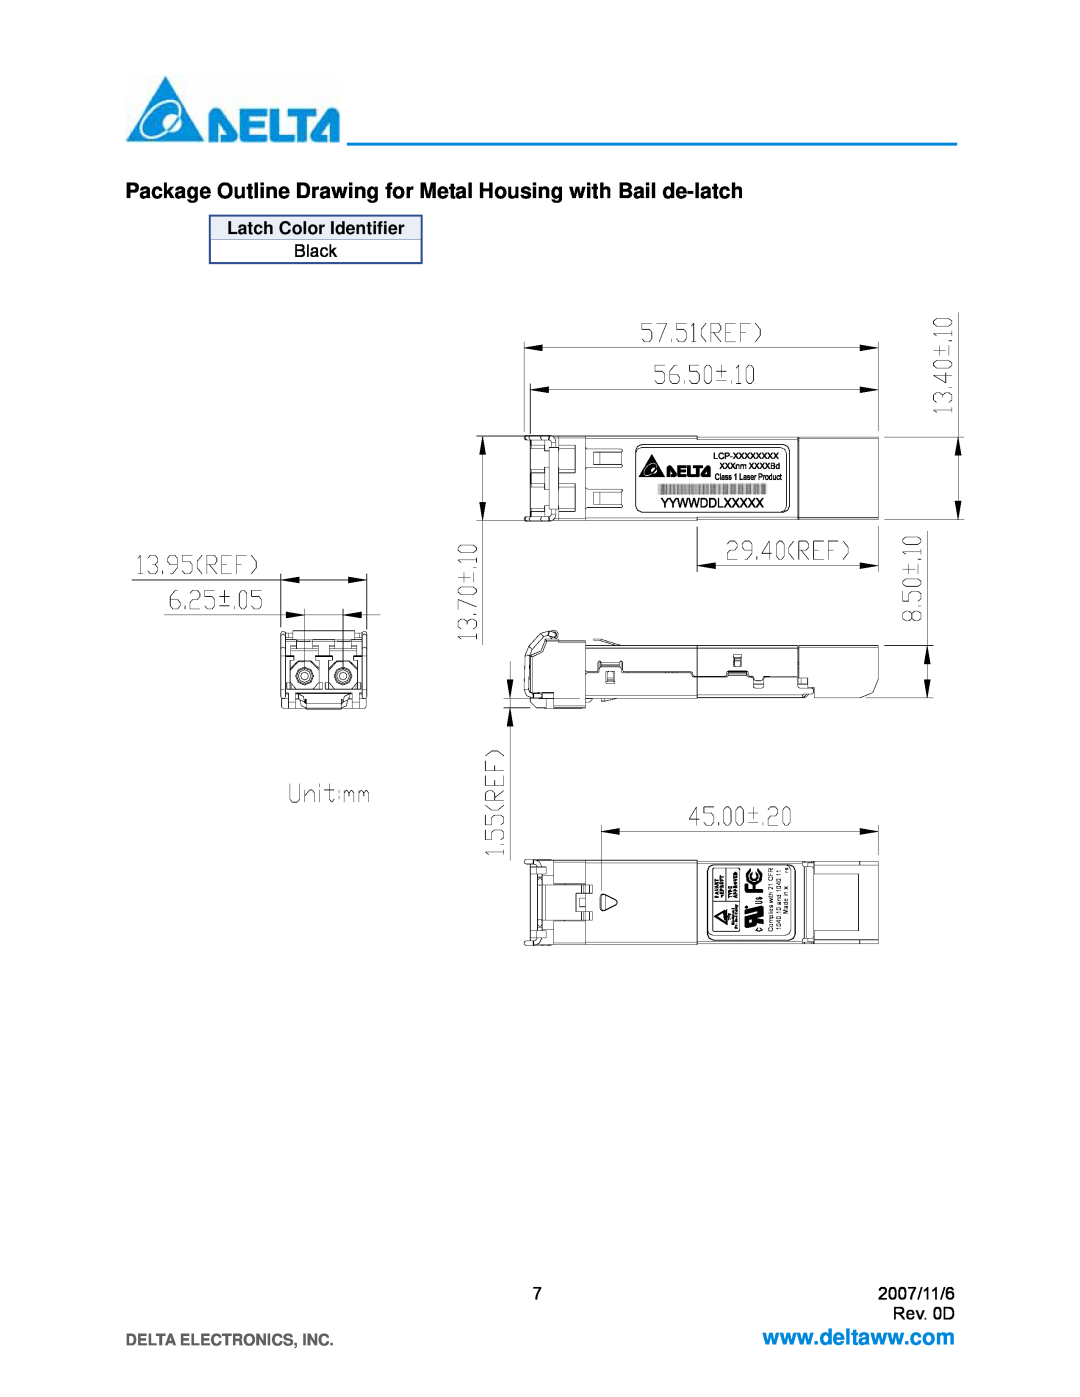 Delta Electronics LCP-155A4HSRBx Package Outline Drawing for Metal Housing with Bail de-latch, Latch Color Identifier 